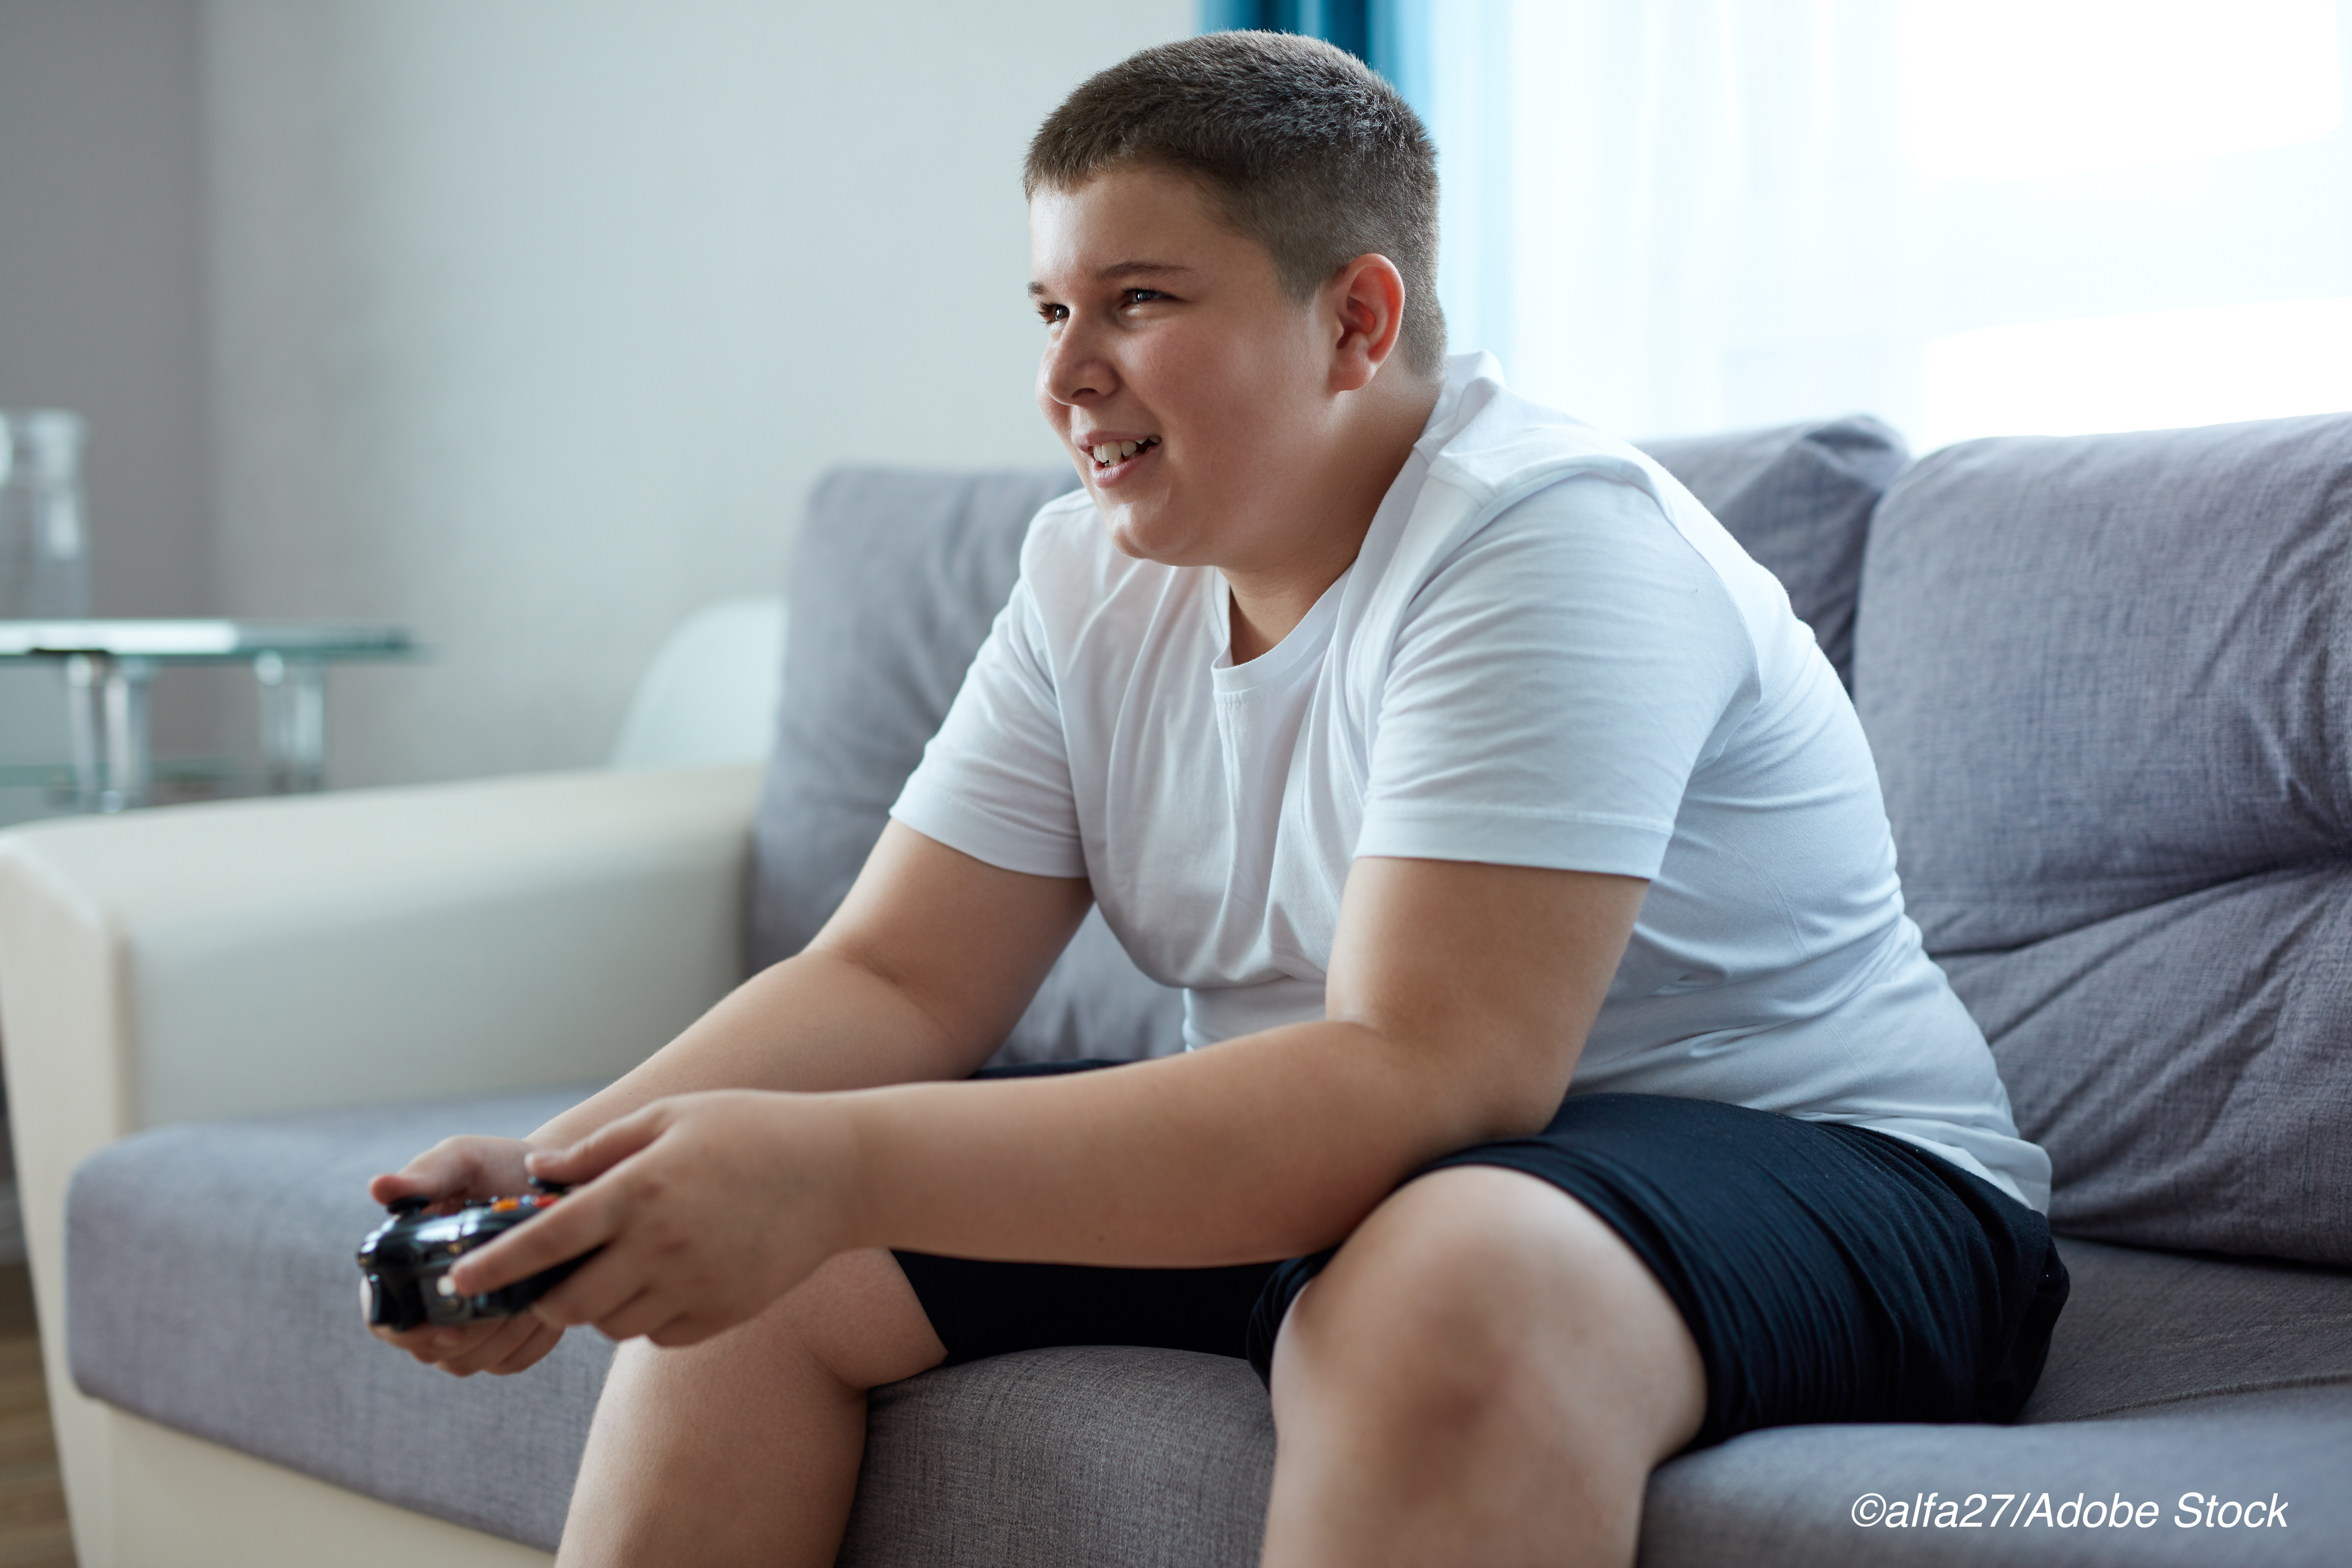 Less Active Kids with Weight Issues May Face Higher CV Risks